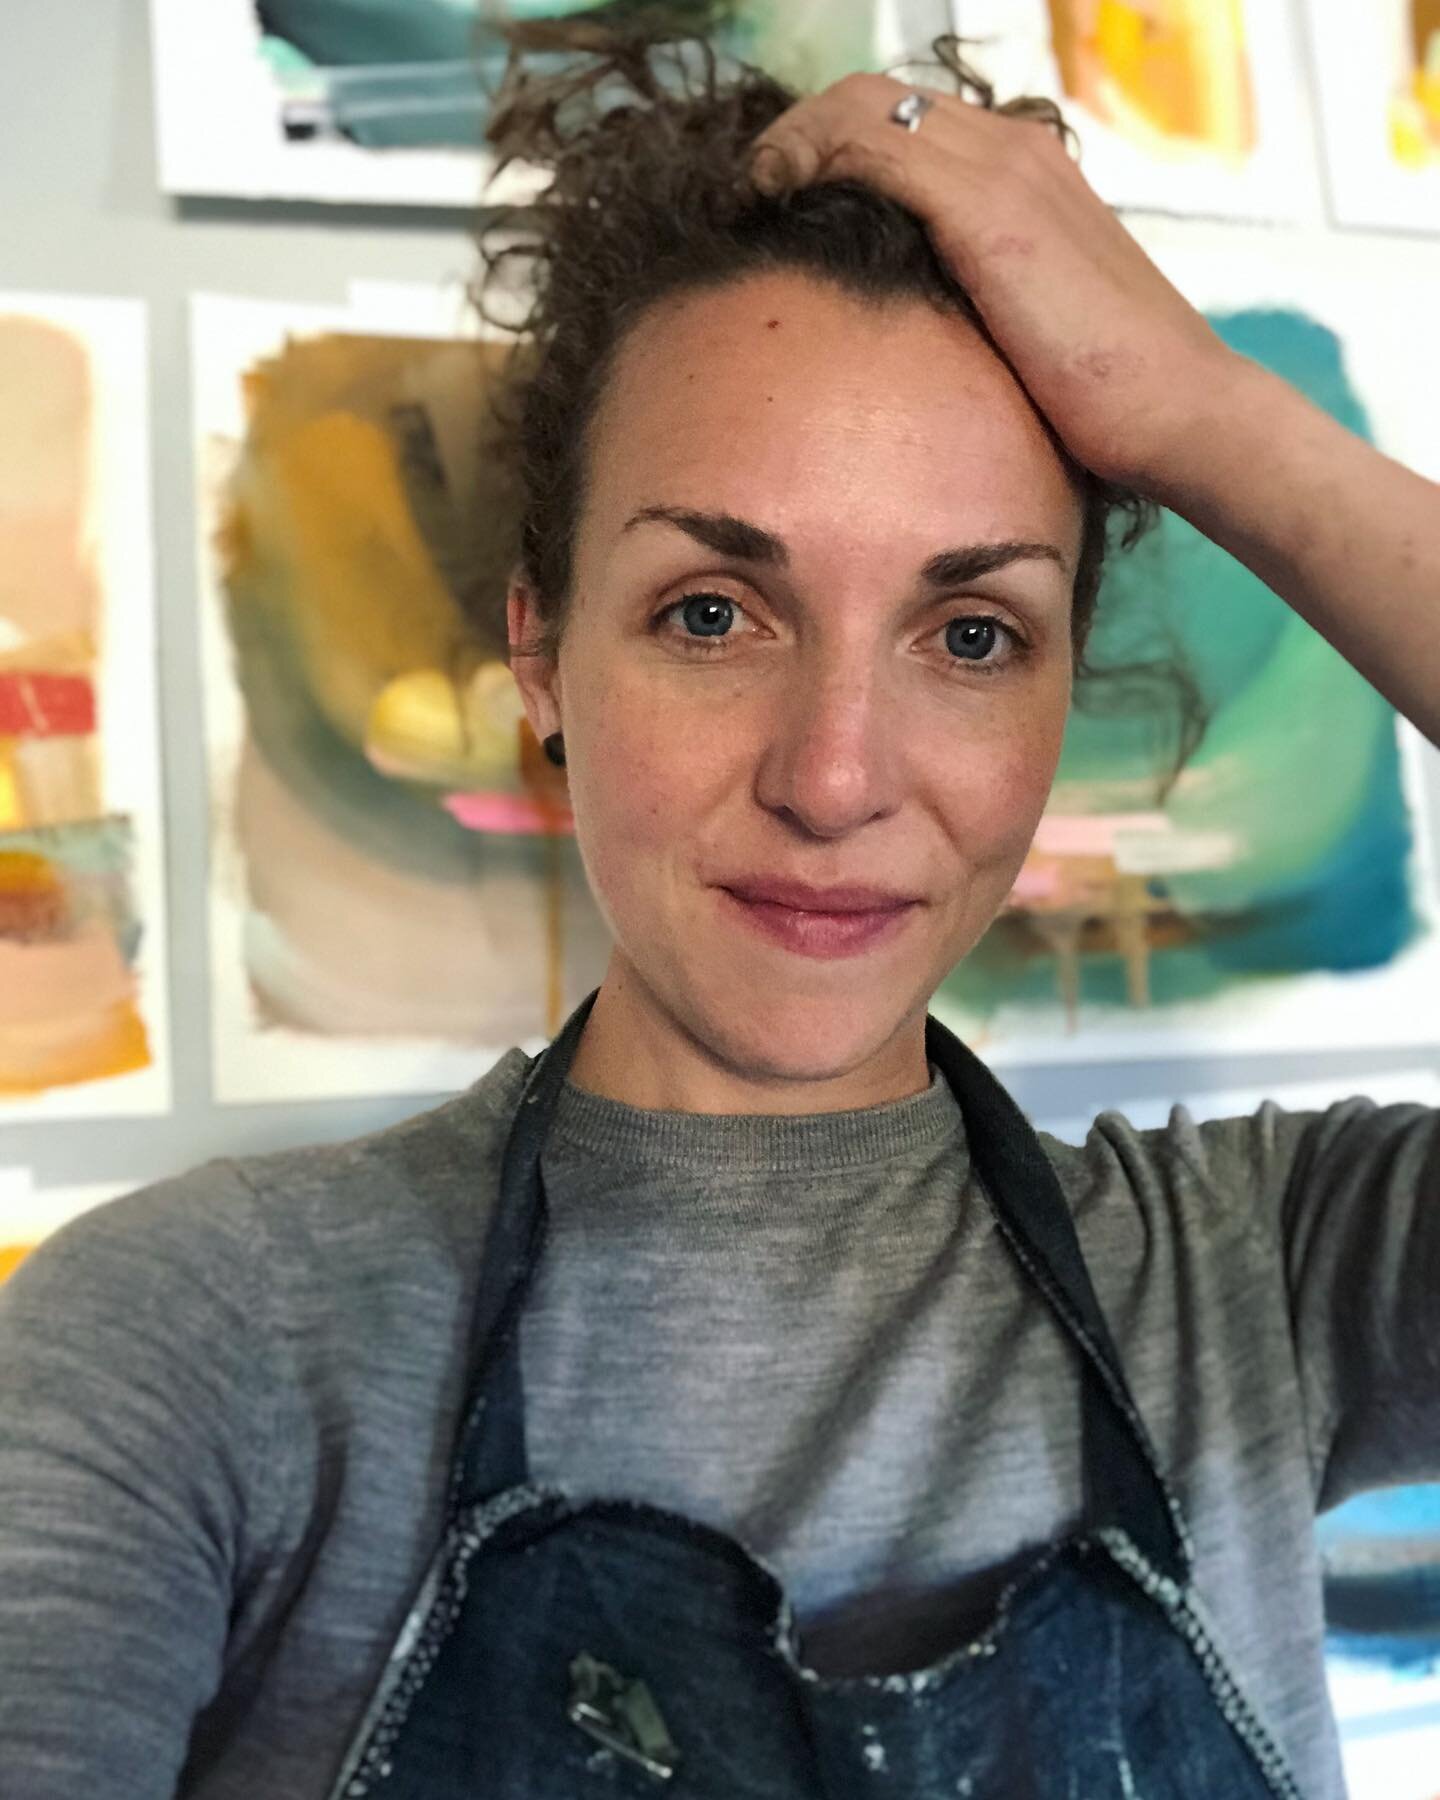 My makeup bag has been missing for 3 days&hellip; but I took a selfie anyway. 🫠
I am releasing a big batch of work online tomorrow. So, soon these paintings that have surrounded me in the studio for weeks will be packed up and gone. I wanted to mark